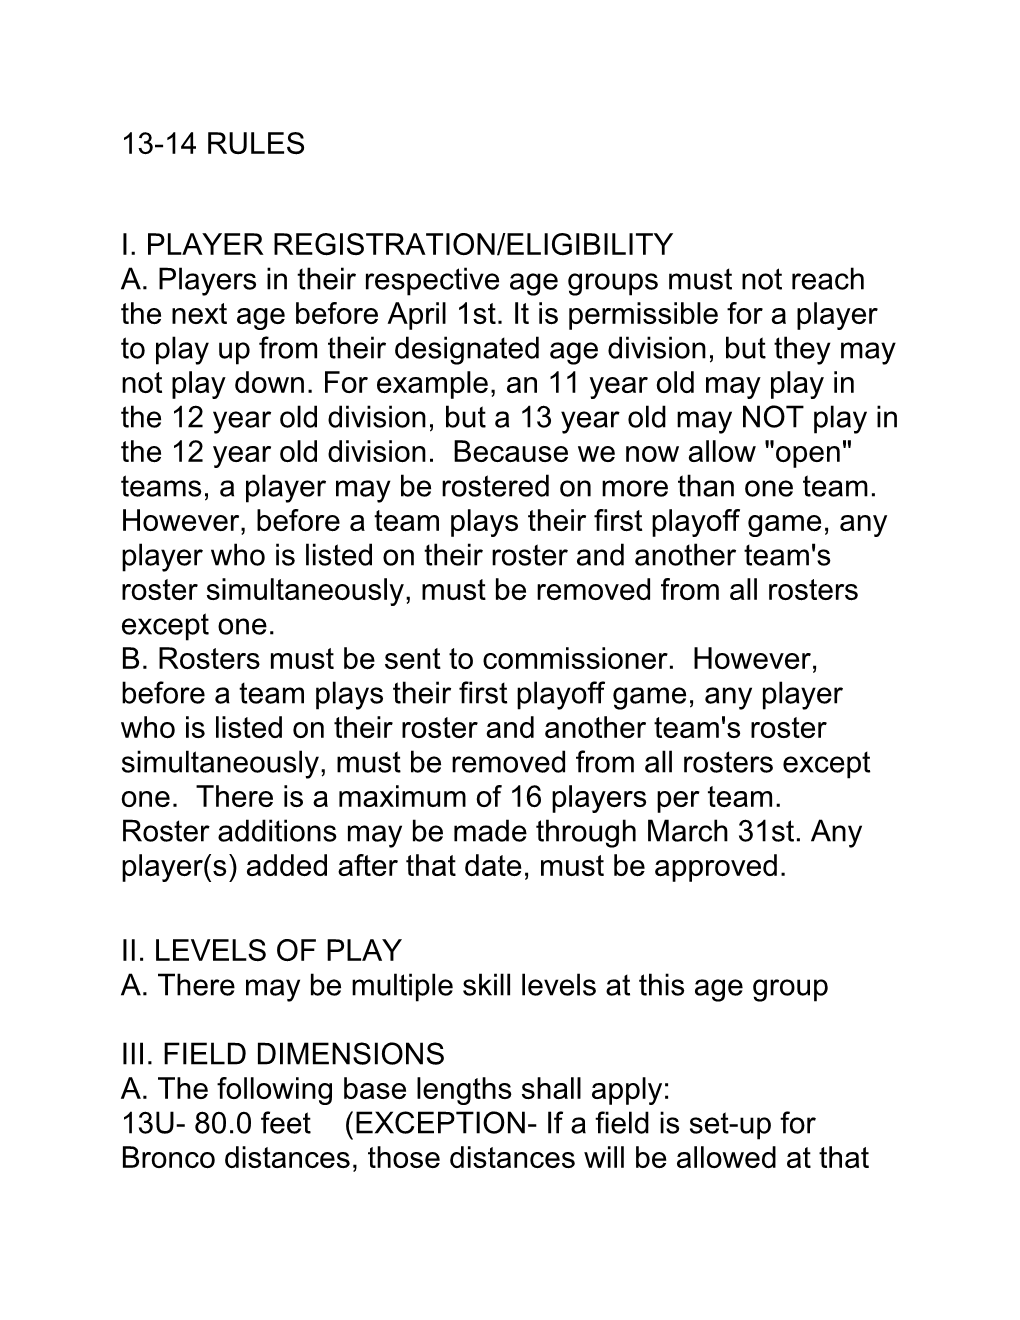 I. PLAYER REGISTRATION/ELIGIBILITY A. Players in Their Respective Age Groups Must Not Reach